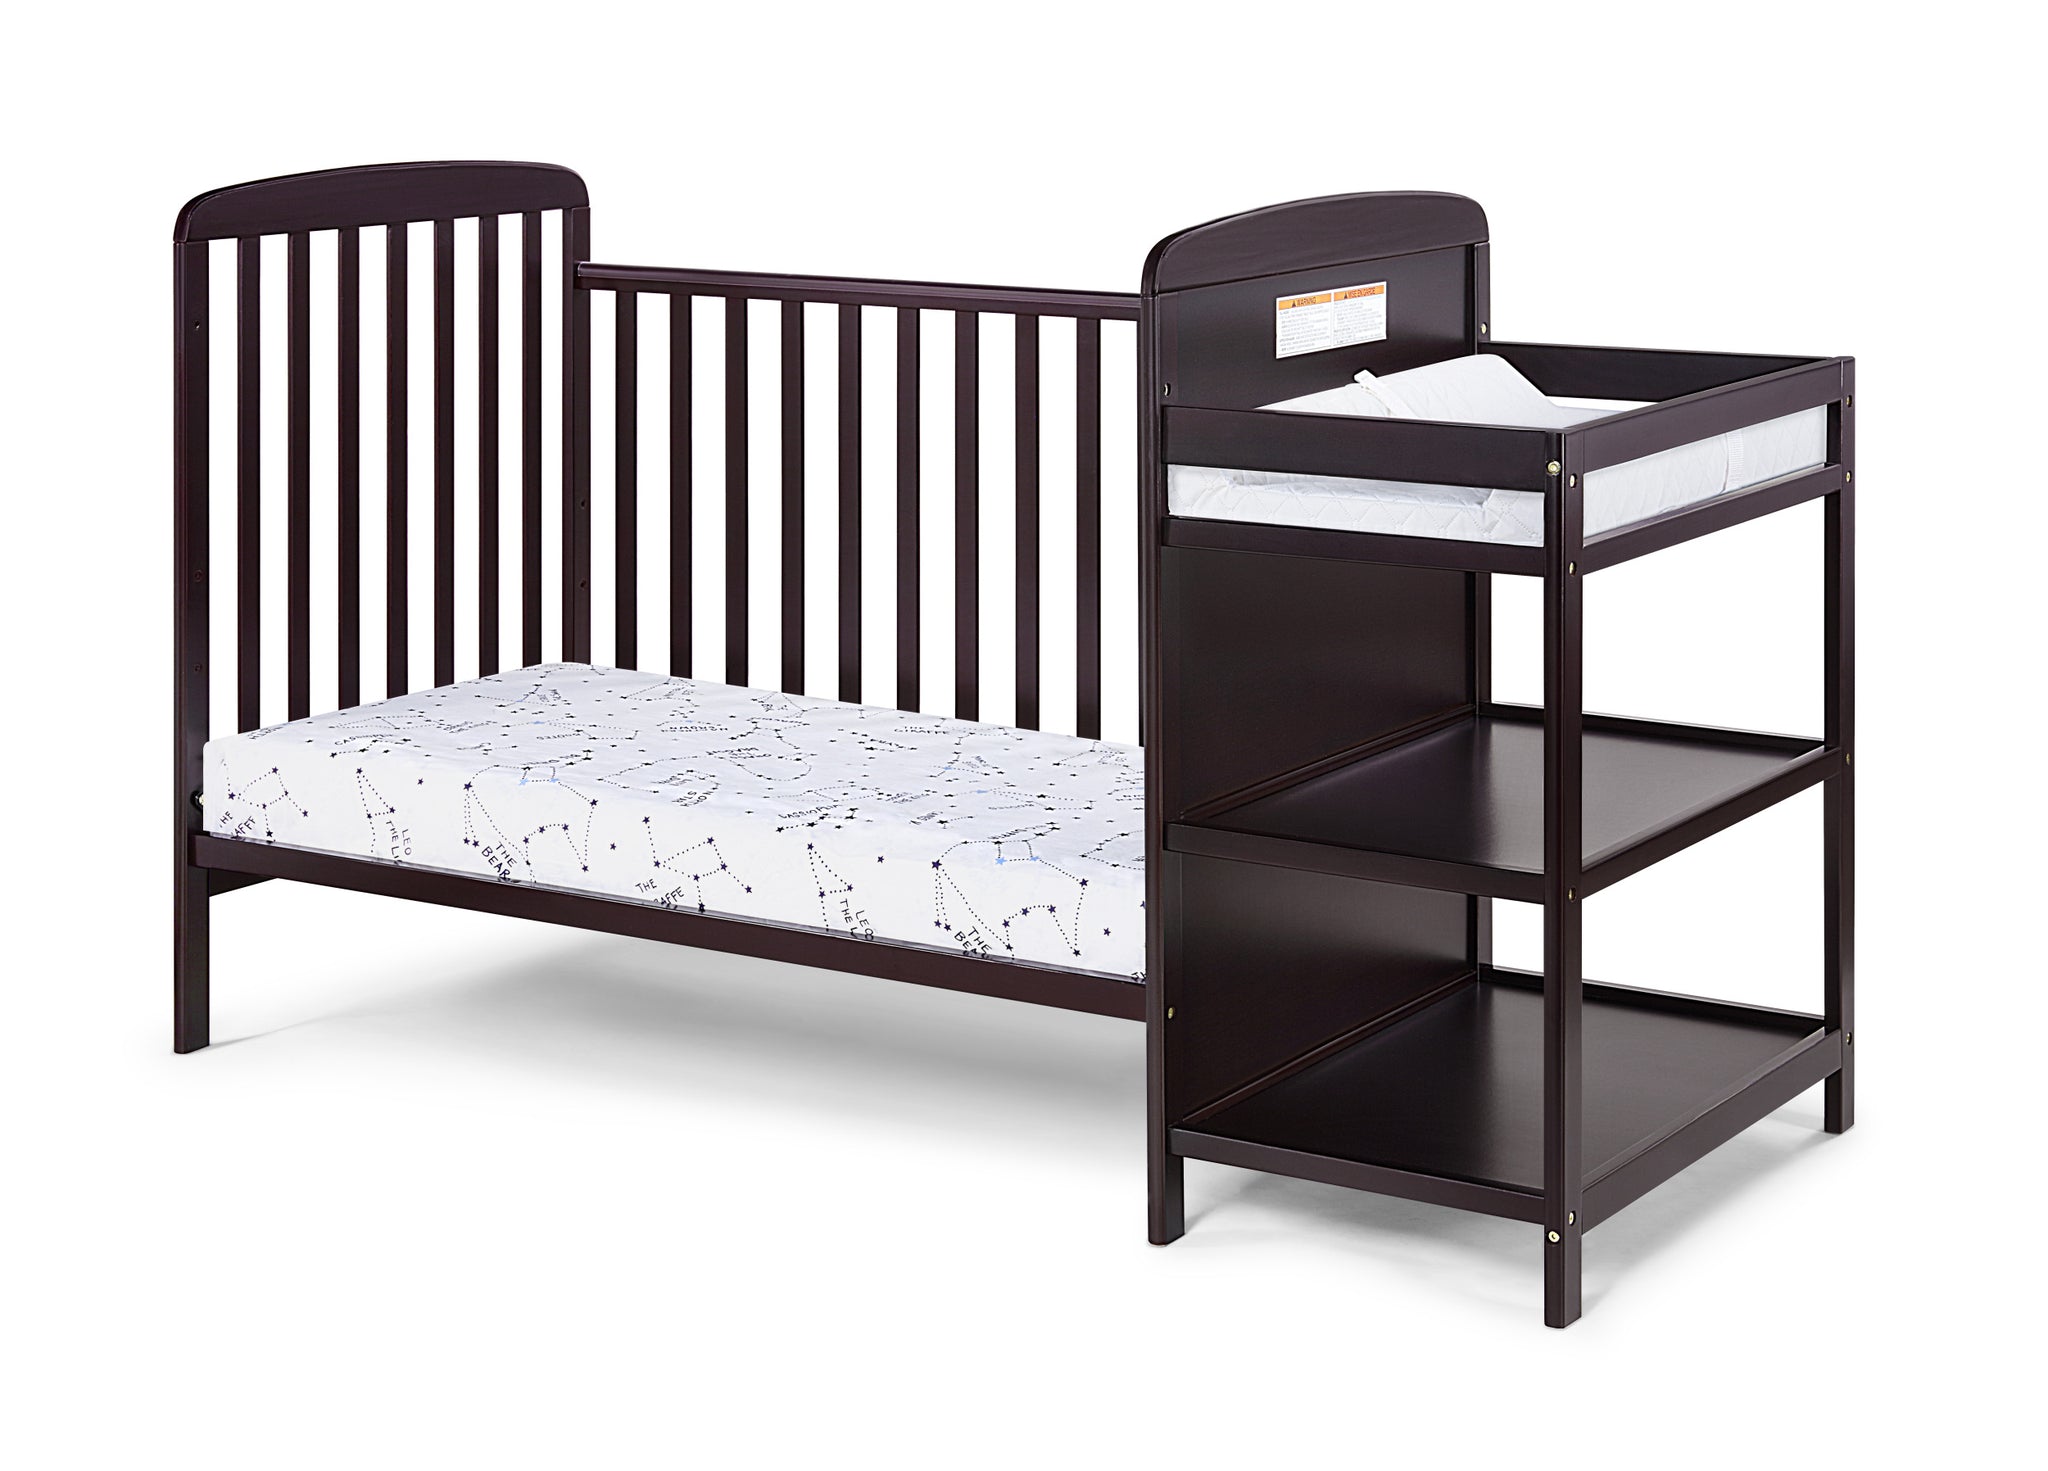 Ramsey 3 in 1 Convertible Crib and Changer Combo espresso-solid wood